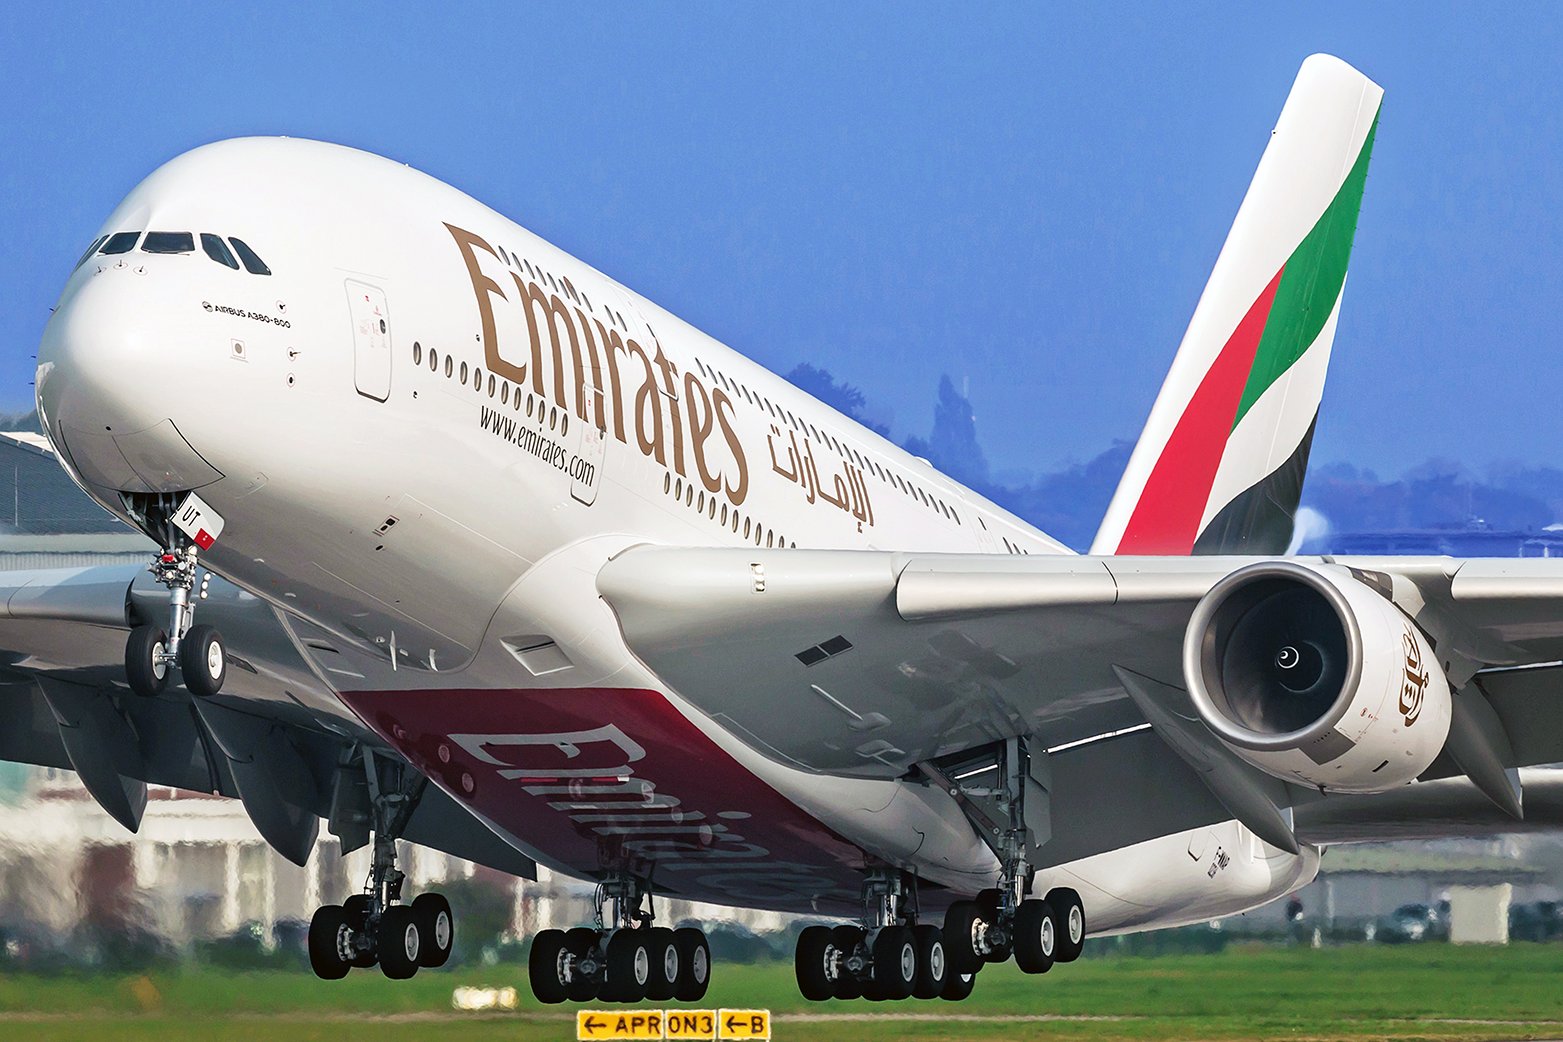 Emirates Airline on Twitter: "As instructed by @hhshkmohd